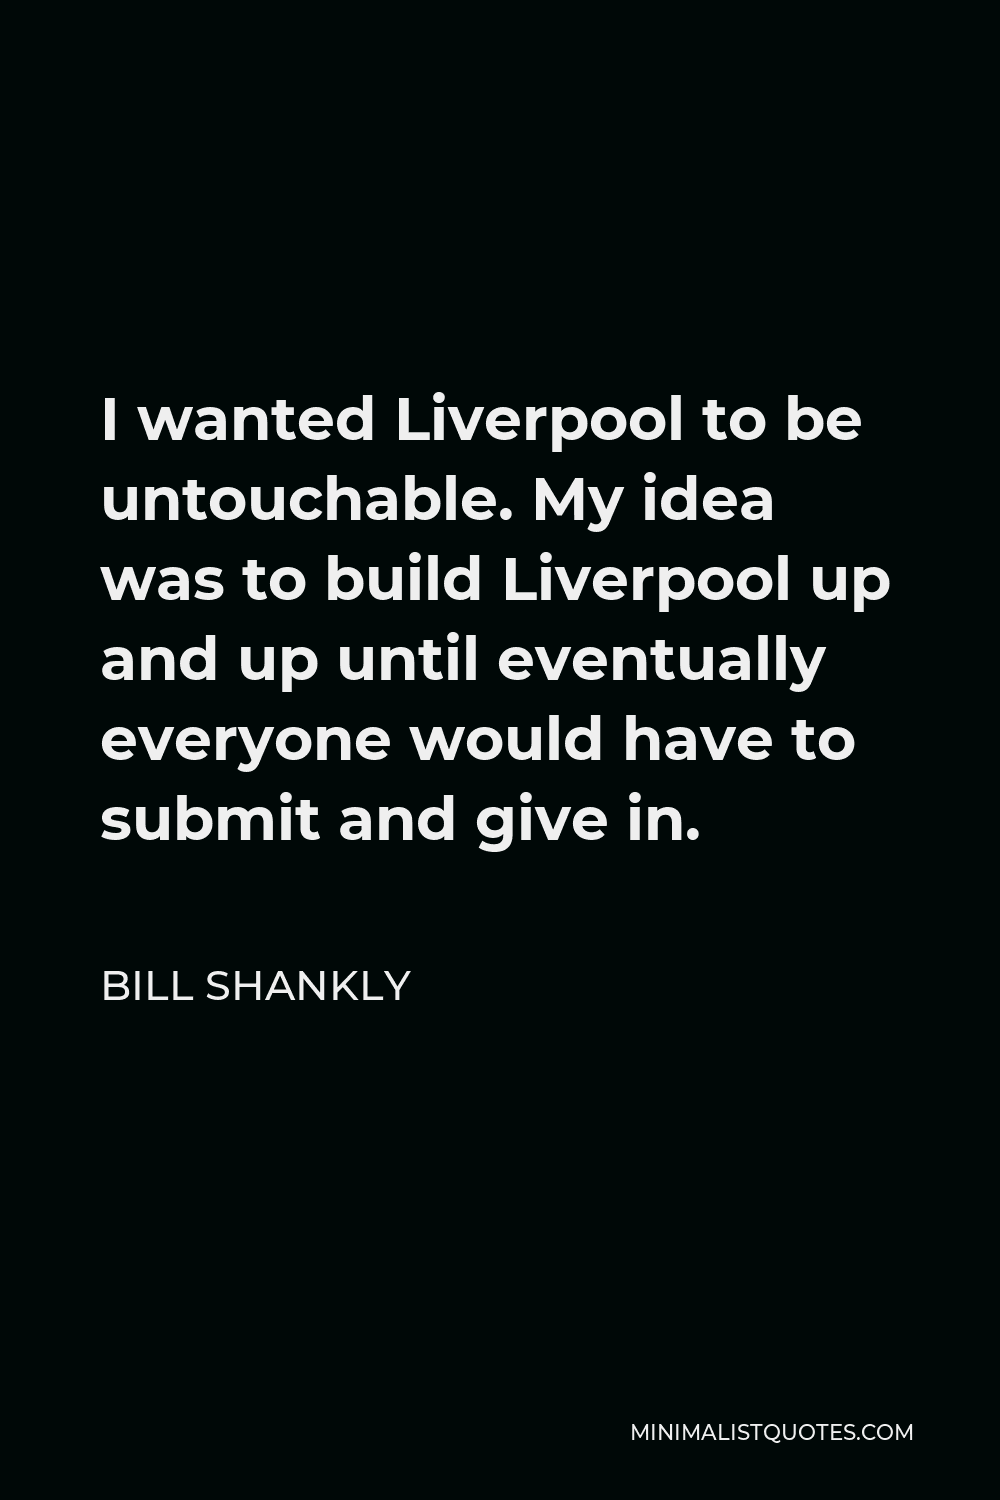 Bill Shankly Quote - I wanted Liverpool to be untouchable. My idea was to build Liverpool up and up until eventually everyone would have to submit and give in.